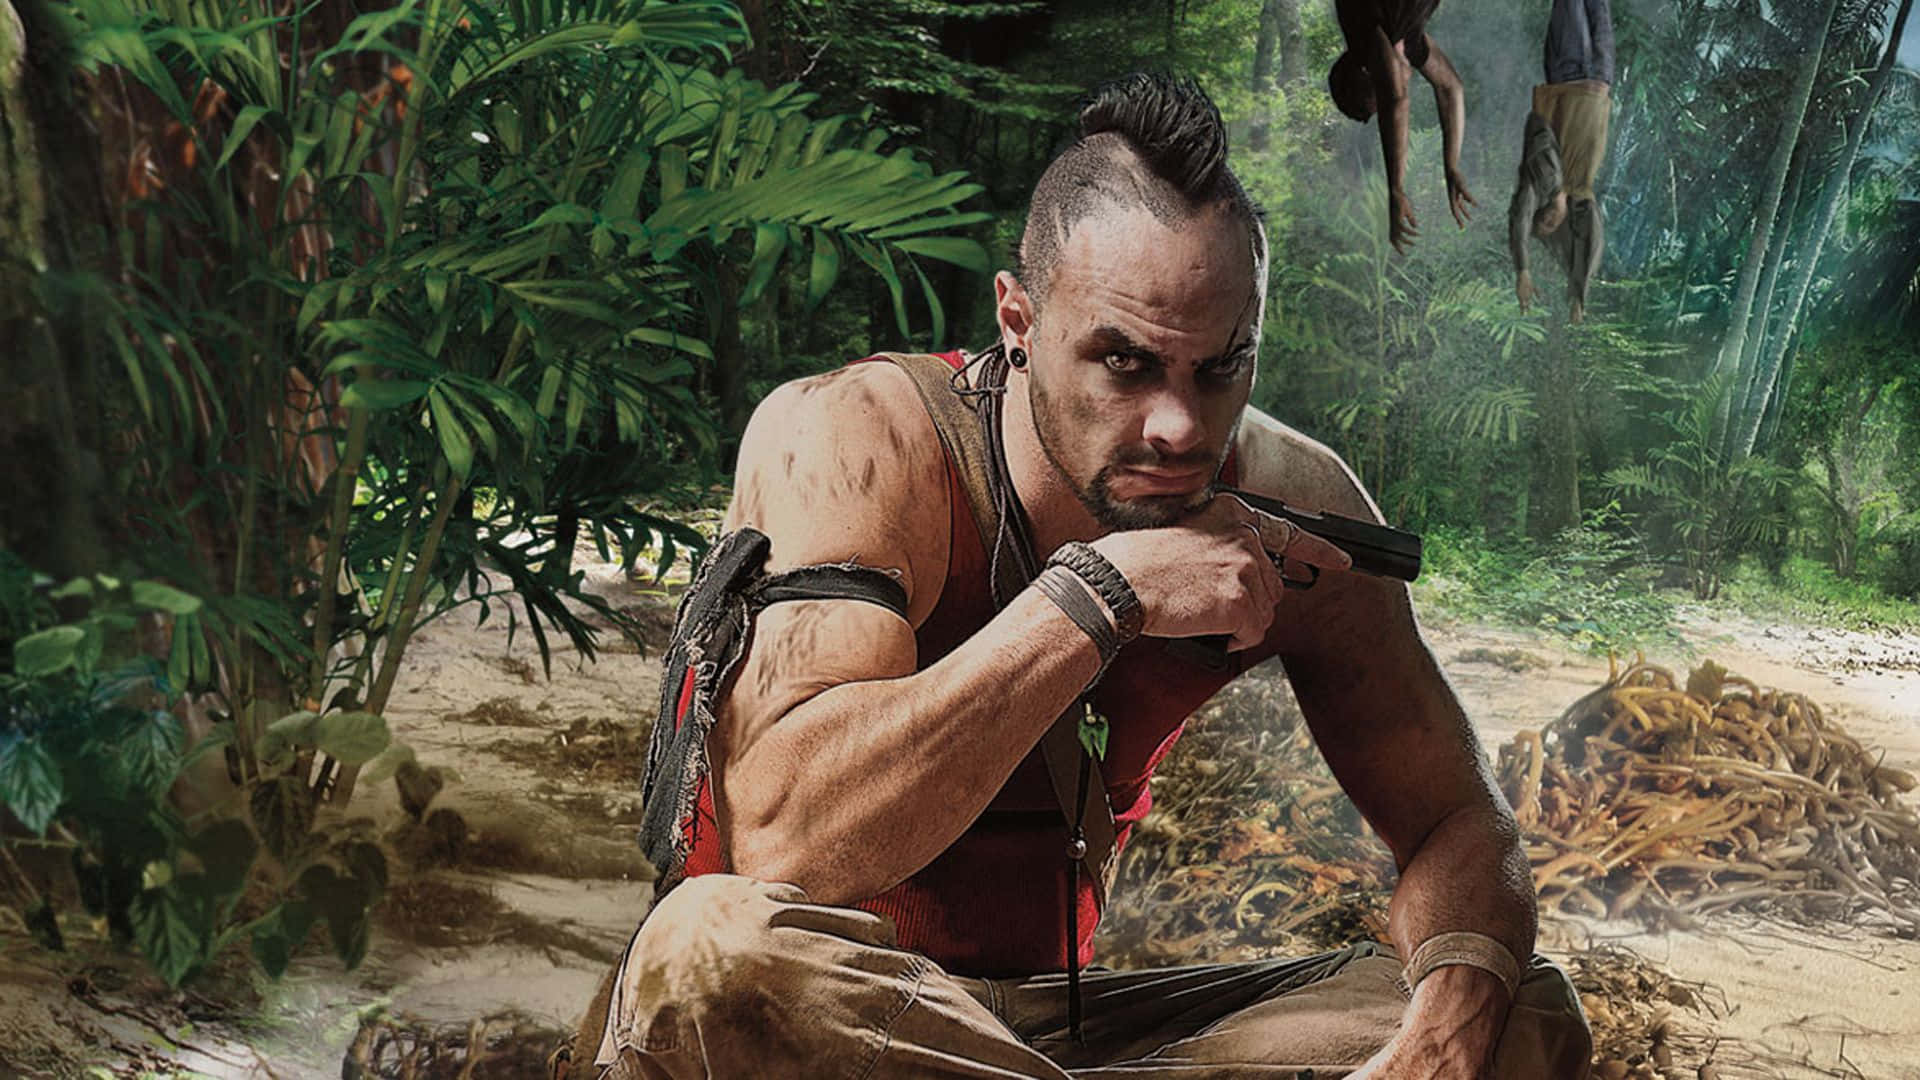 "Live life on the edge of insanity, just like Vaas in Far Cry 3." Wallpaper